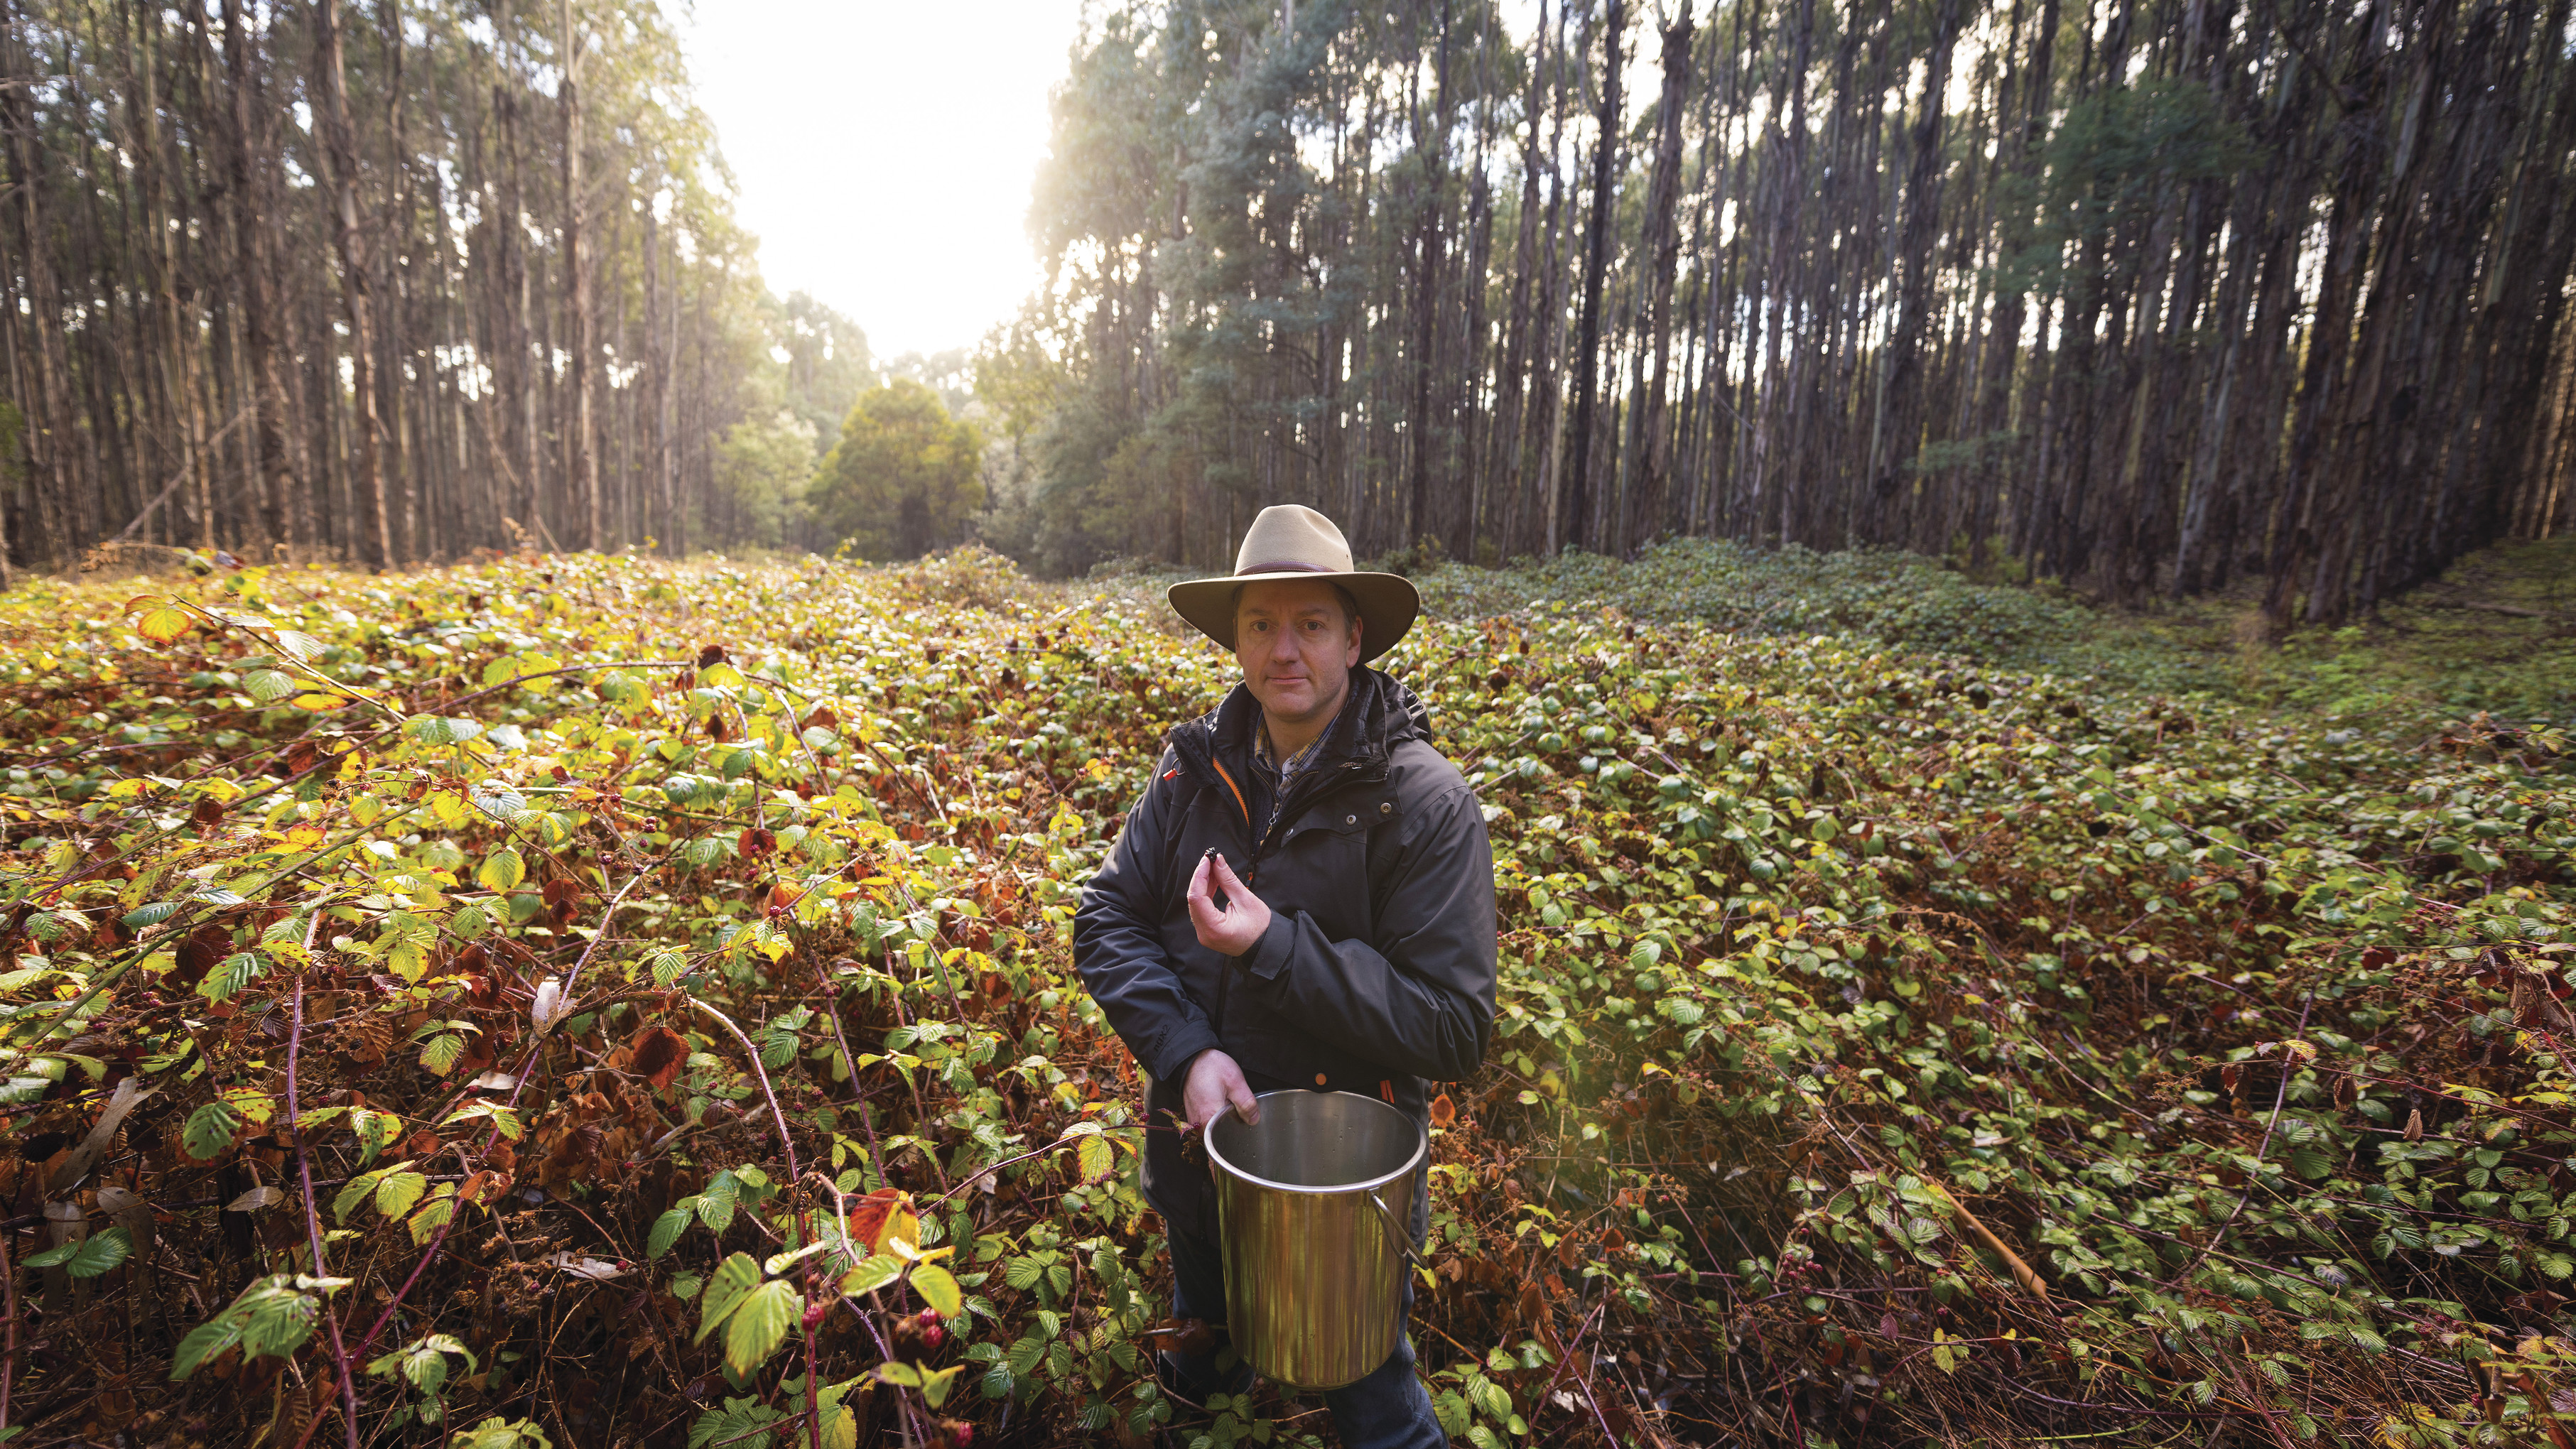 A man stands with a bucket in front of fresh growing ingredients at Southern Wild Distillery, he is about the pick the produce.